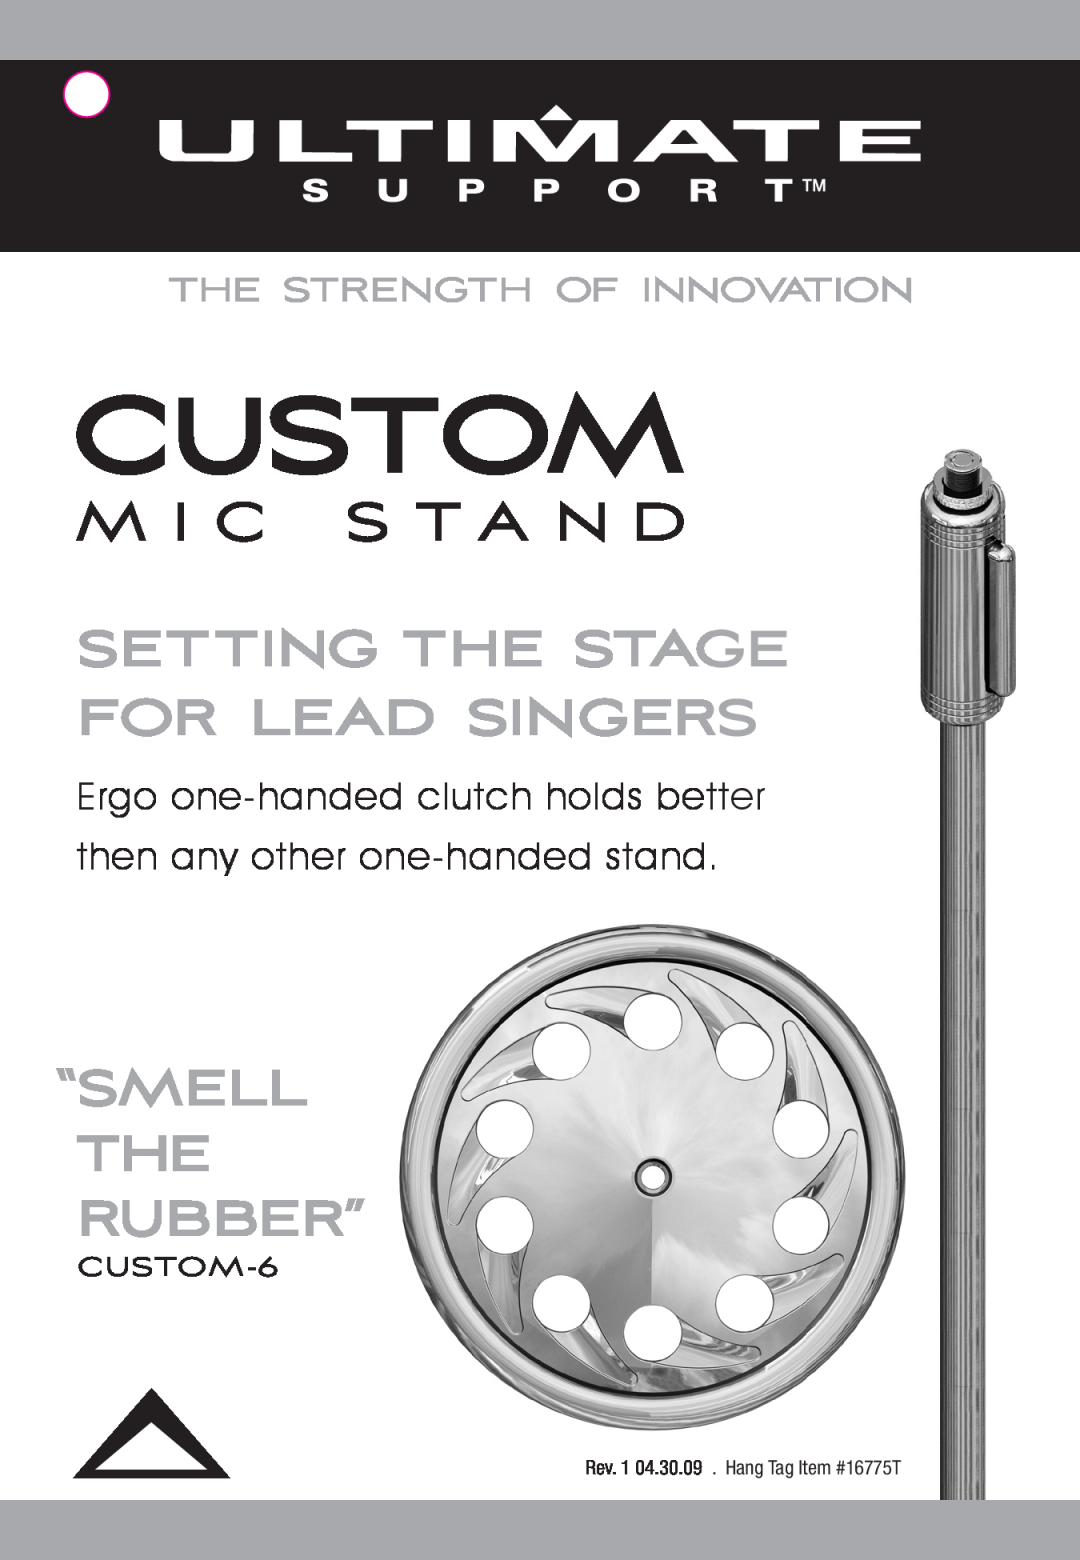 Ultimate Support Systems CUSTOM-6 manual Setting The Stage For Lead Singers, ”Smell The Rubber” 